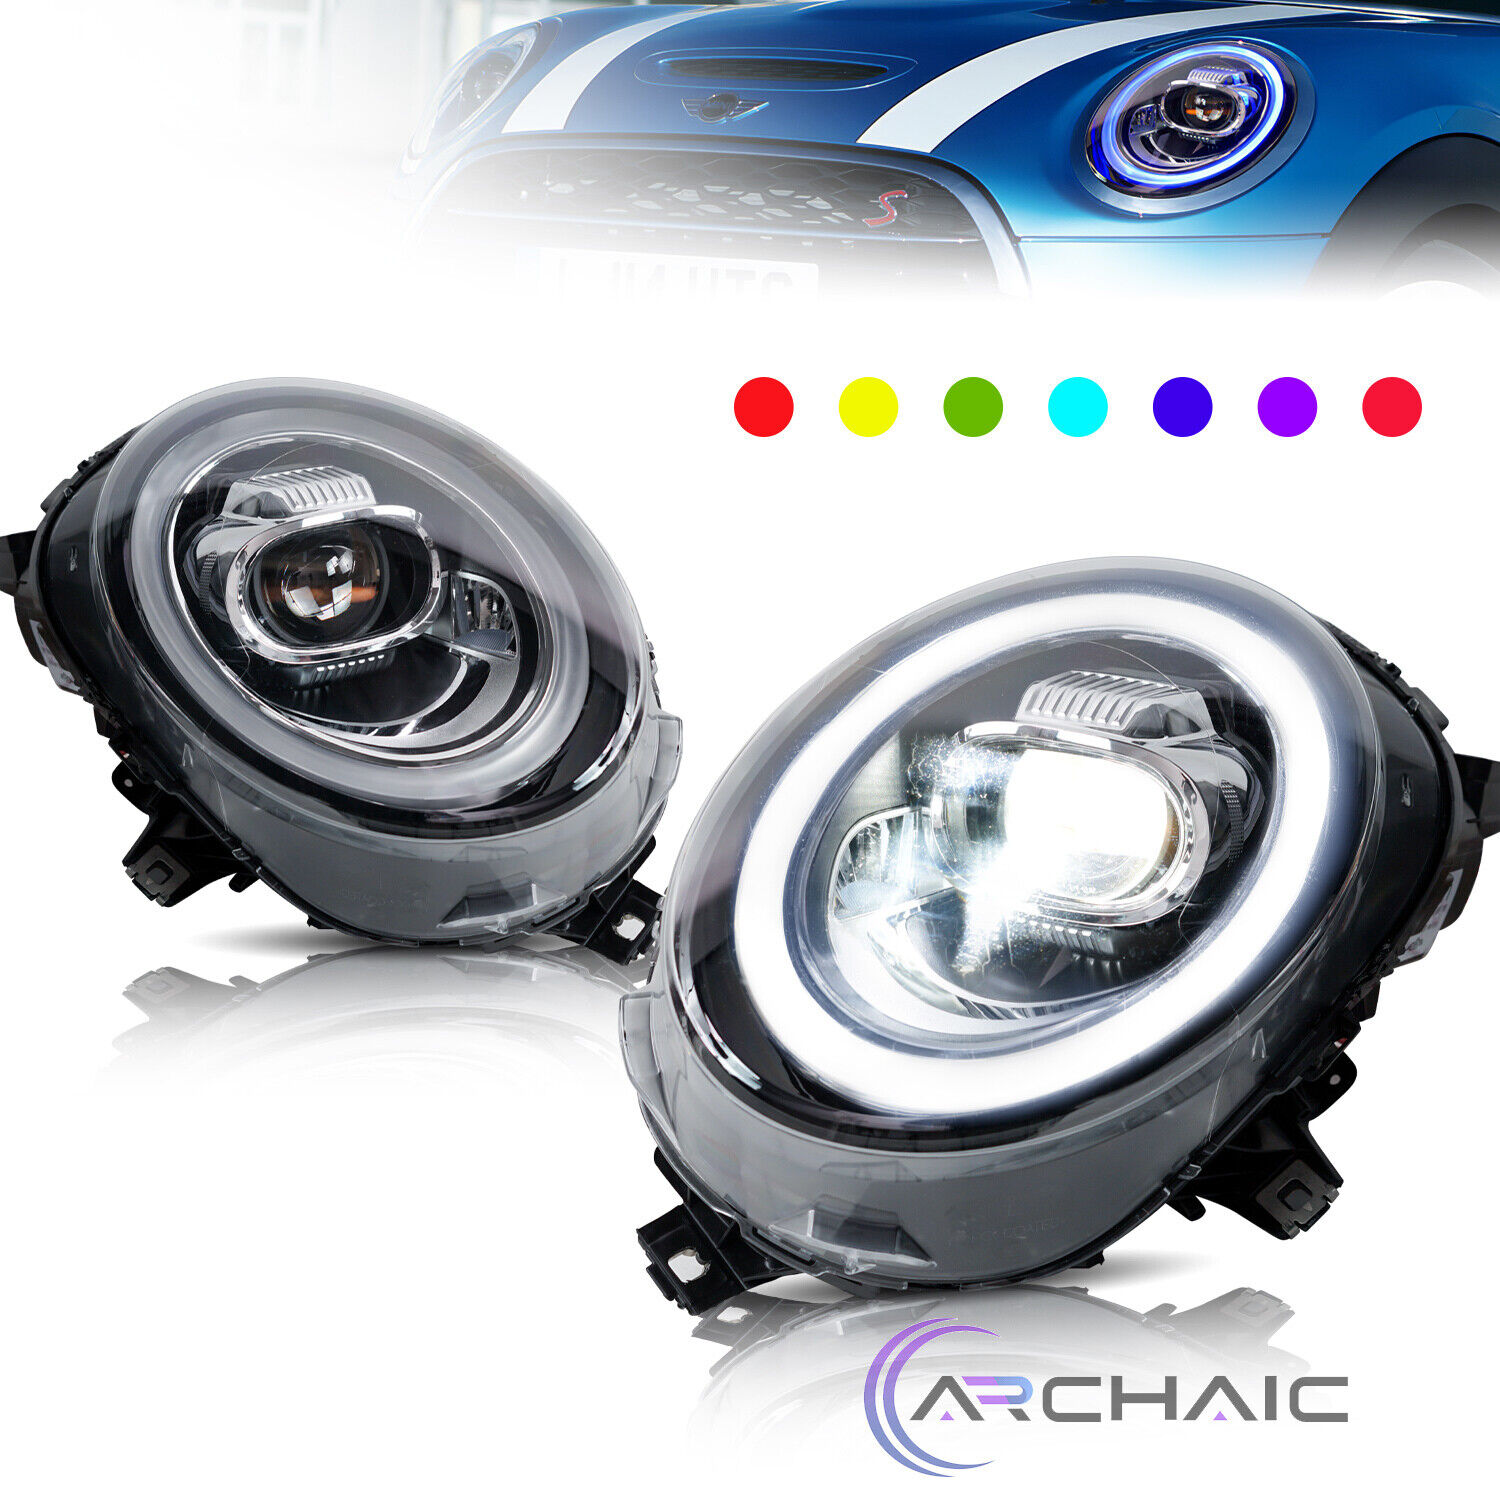 LED Headlights for Mini Cooper F56 F55 F57 2014-21,W Sequential,Animation DRL